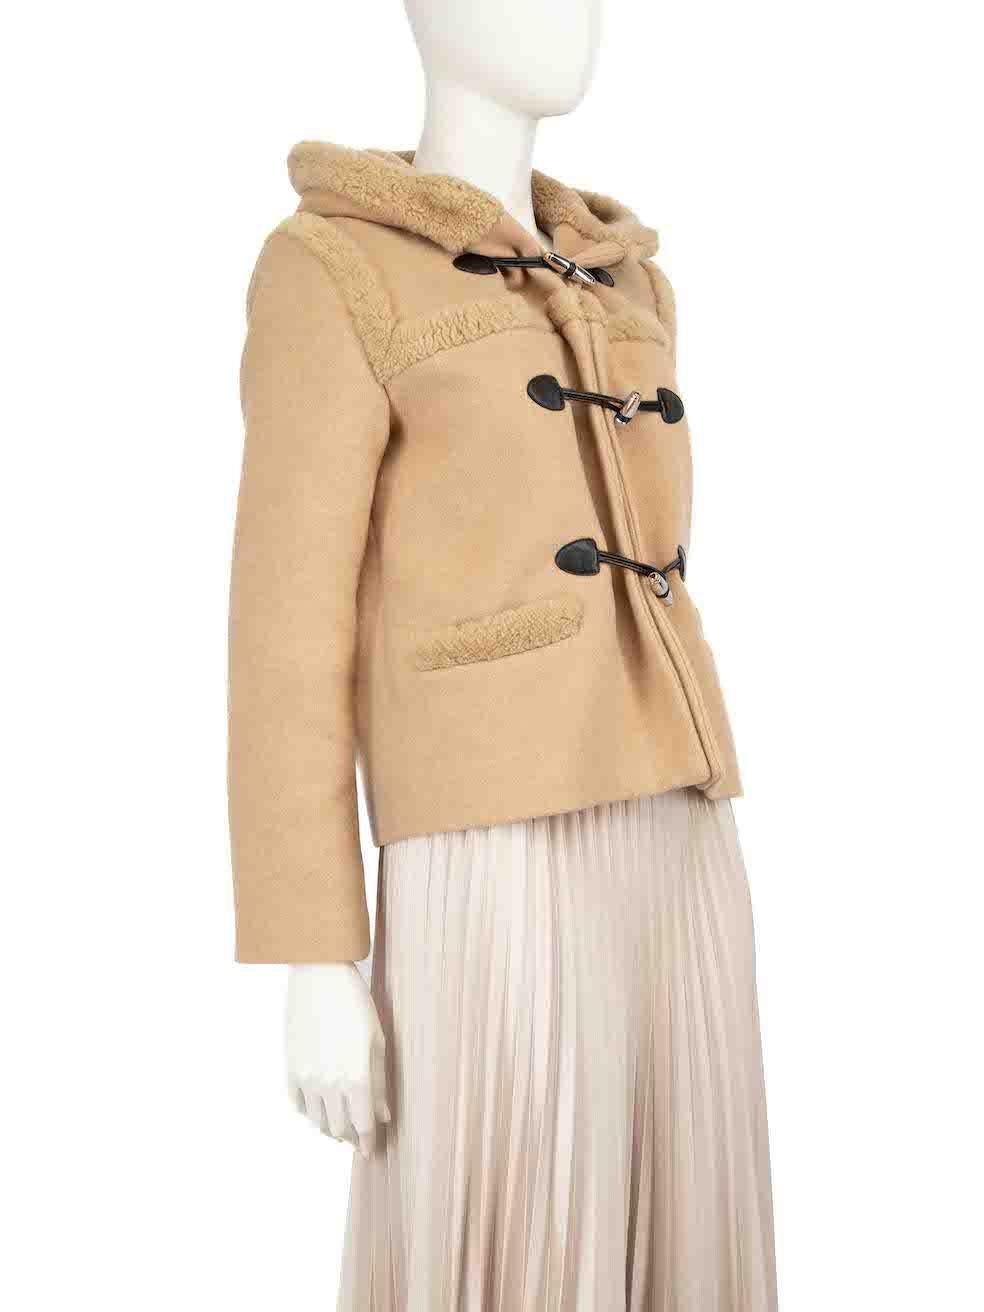 CONDITION is Good. Minor wear to coat is evident. Light pilling to the hemline and small abrasion to the right sleeve. Discolouration to the lining and internal bust area on this used Sandro designer resale item.
 
 
 
 Details
 
 
 Camel
 
 Wool
 
